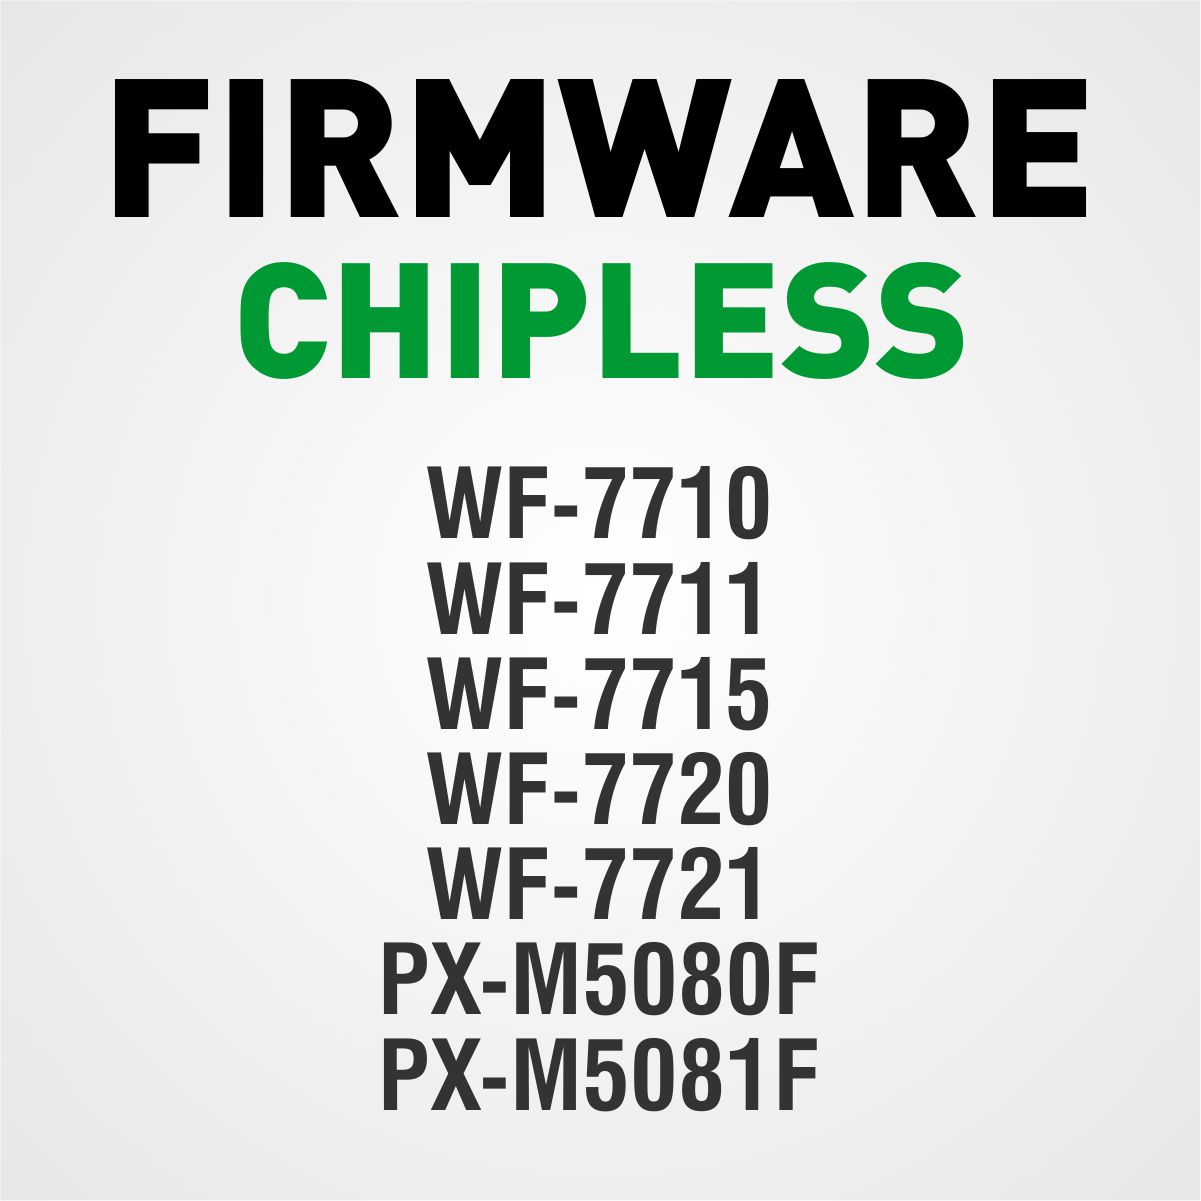 EPSON WF-7710, WF-7711, WF-7715, WF-7720, WF-7721, PX-M5080F e PX-M5081F | Arquivo Firmware ChipLess